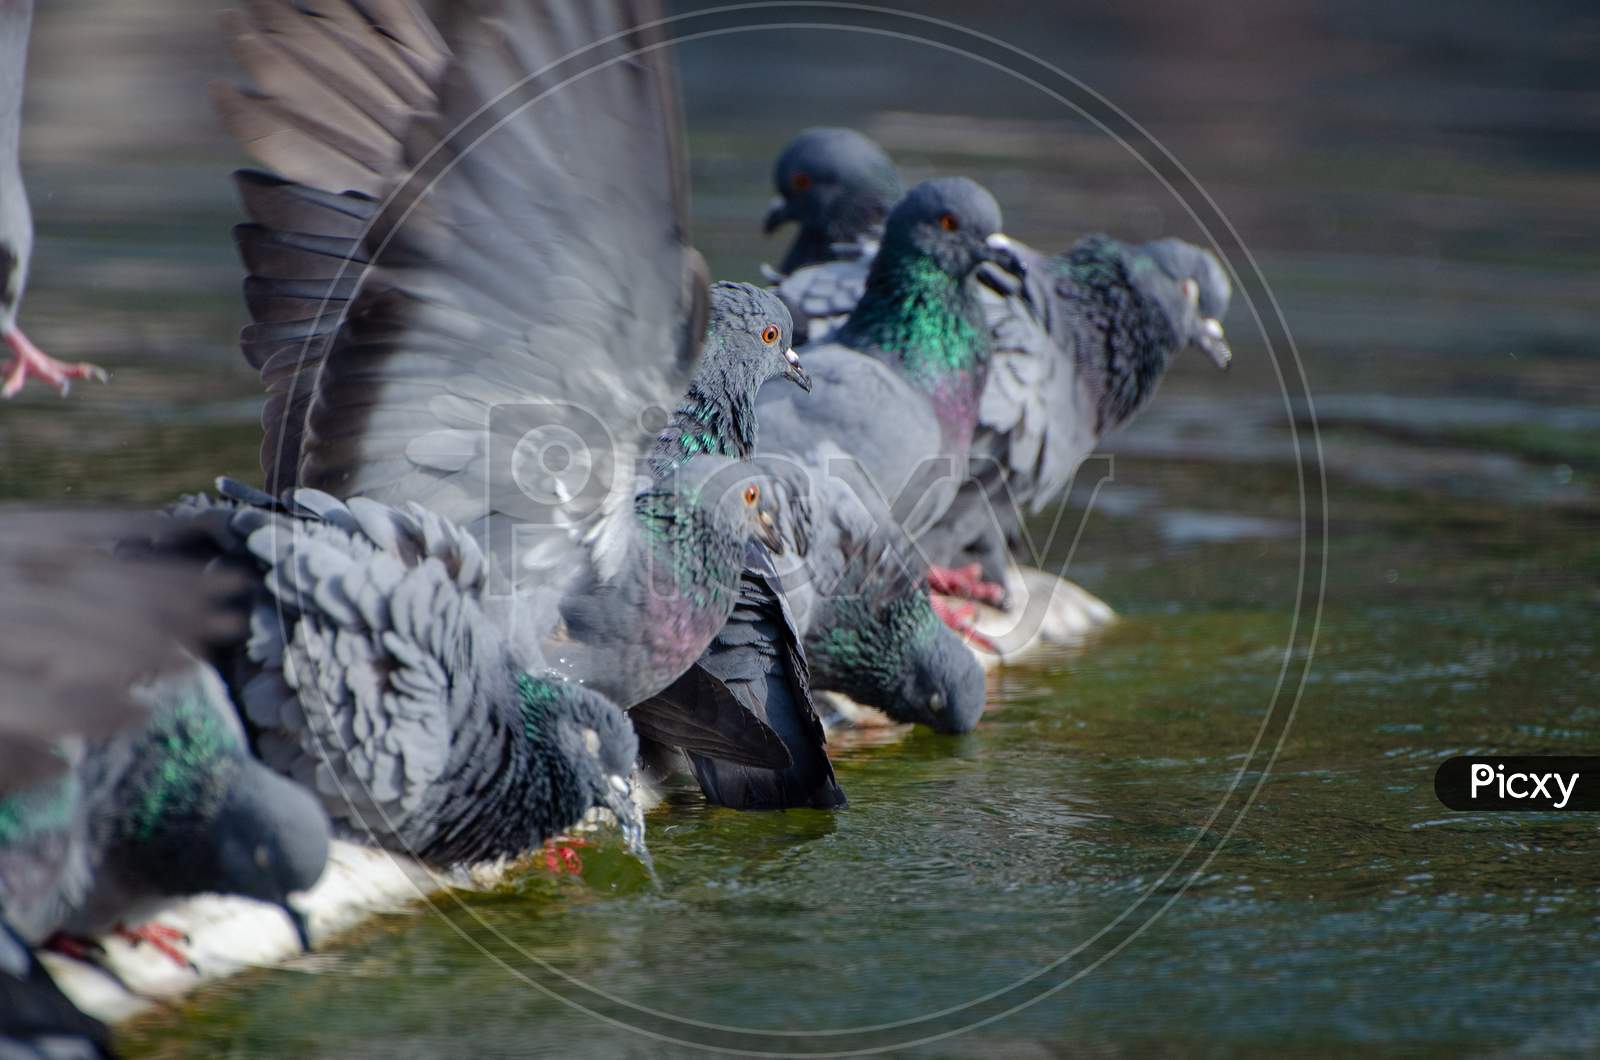 Flock of pigeons playing in the water